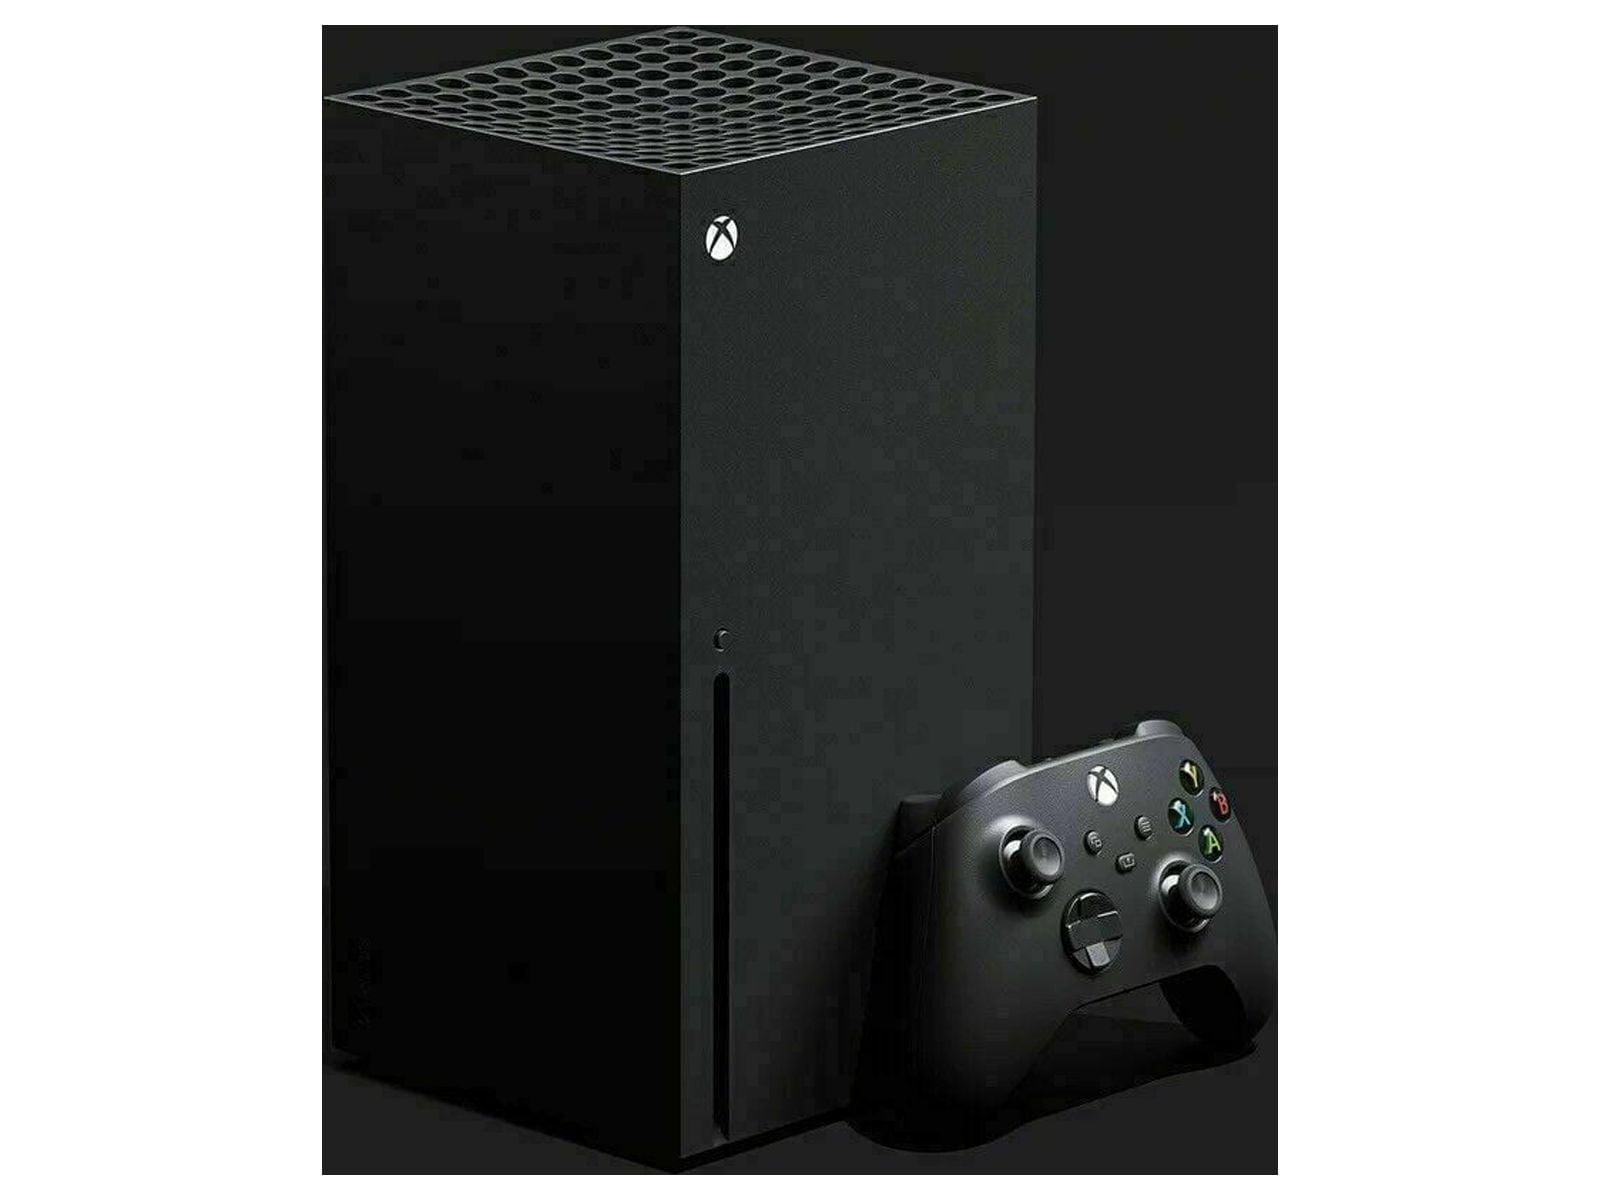 Xbox Series X Disk Version, 1TB SSD, 4K gaming, 8K HDR, Up to 